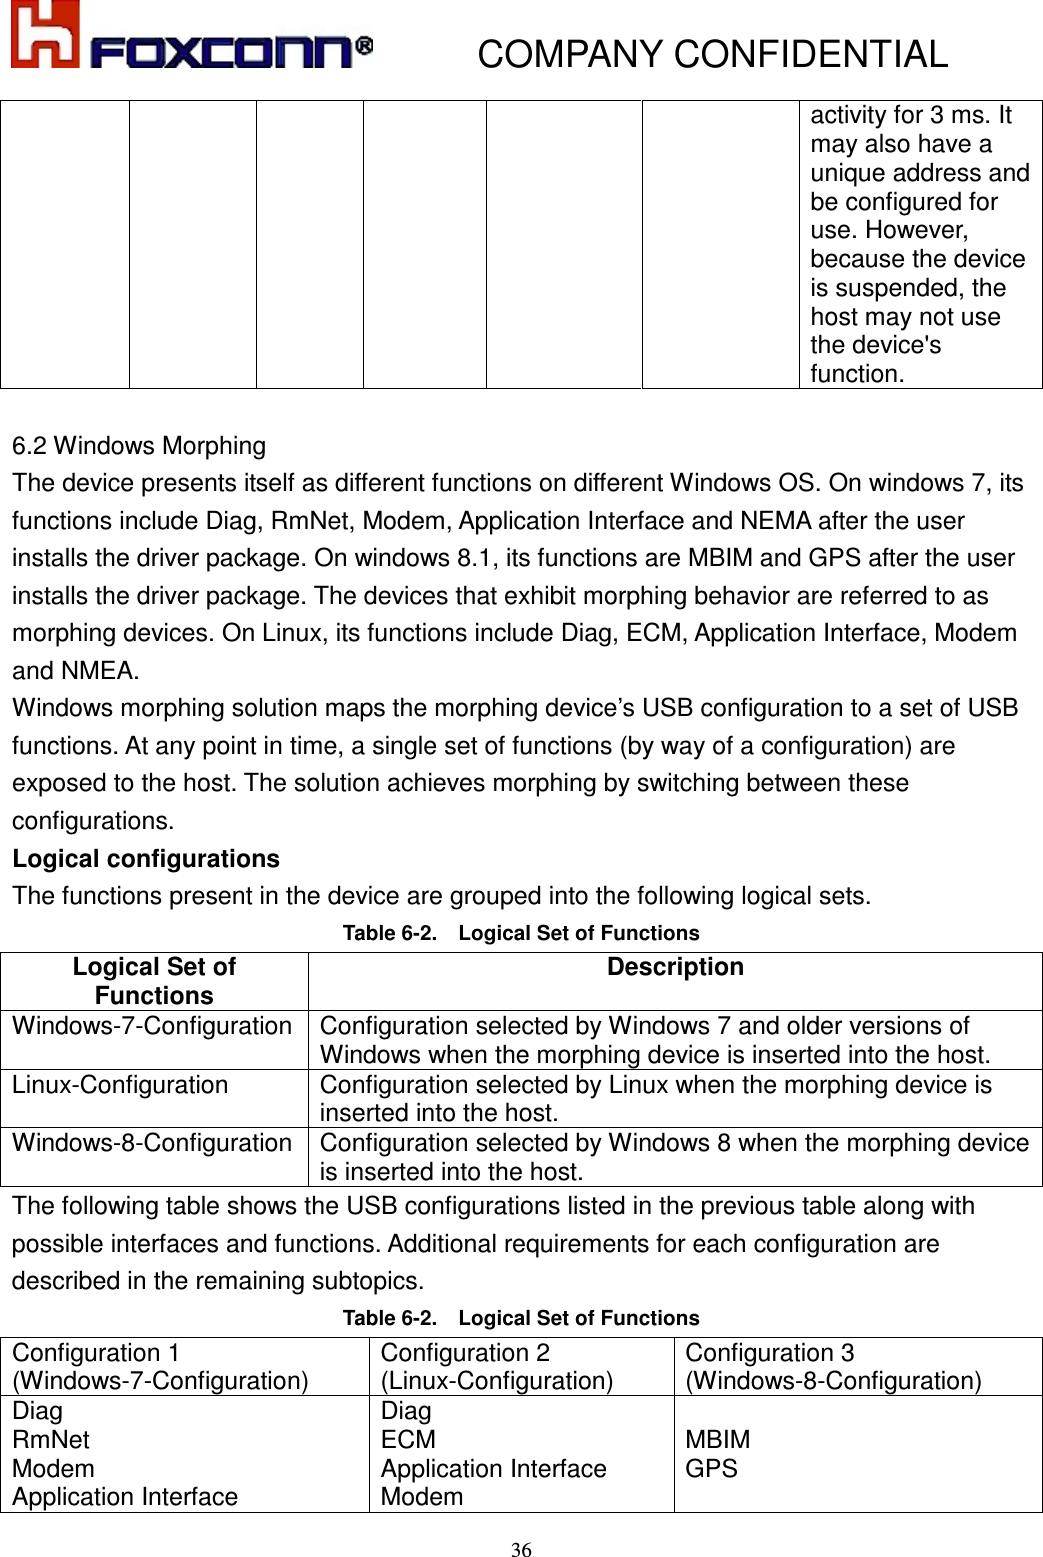           COMPANY CONFIDENTIAL    36 activity for 3 ms. It may also have a unique address and be configured for use. However, because the device is suspended, the host may not use the device&apos;s function.  6.2 Windows Morphing The device presents itself as different functions on different Windows OS. On windows 7, its functions include Diag, RmNet, Modem, Application Interface and NEMA after the user installs the driver package. On windows 8.1, its functions are MBIM and GPS after the user installs the driver package. The devices that exhibit morphing behavior are referred to as morphing devices. On Linux, its functions include Diag, ECM, Application Interface, Modem and NMEA. Windows morphing solution maps the morphing device’s USB configuration to a set of USB functions. At any point in time, a single set of functions (by way of a configuration) are exposed to the host. The solution achieves morphing by switching between these configurations. Logical configurations The functions present in the device are grouped into the following logical sets. Table 6-2.    Logical Set of Functions Logical Set of Functions Description Windows-7-Configuration Configuration selected by Windows 7 and older versions of Windows when the morphing device is inserted into the host. Linux-Configuration  Configuration selected by Linux when the morphing device is inserted into the host. Windows-8-Configuration Configuration selected by Windows 8 when the morphing device is inserted into the host. The following table shows the USB configurations listed in the previous table along with possible interfaces and functions. Additional requirements for each configuration are described in the remaining subtopics. Table 6-2.    Logical Set of Functions Configuration 1 (Windows-7-Configuration) Configuration 2 (Linux-Configuration) Configuration 3 (Windows-8-Configuration) Diag RmNet Modem Application Interface Diag ECM Application Interface Modem MBIM GPS 